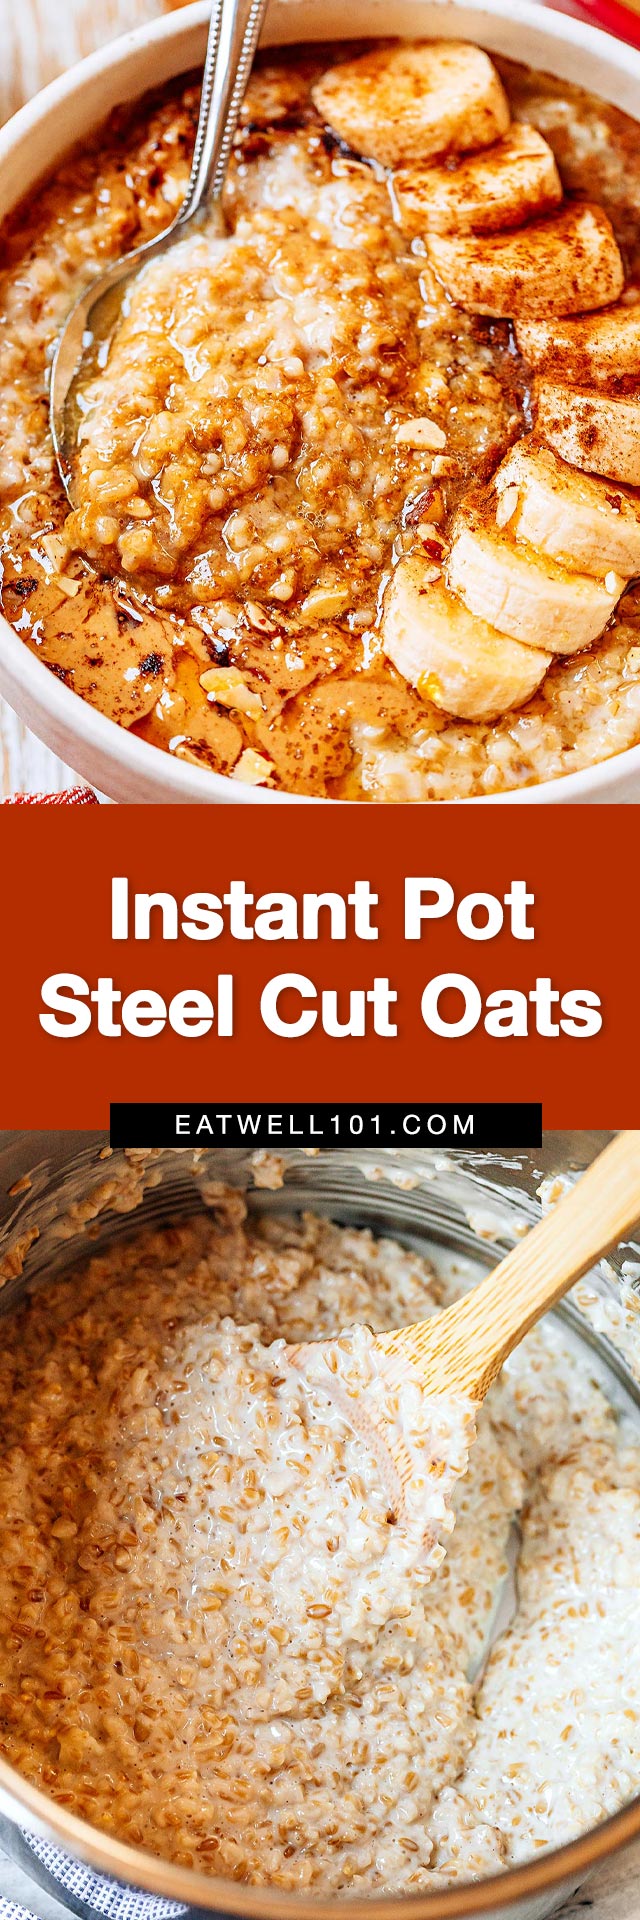 Banana steel-cut oats in the Instant Pot - #InstantPot #oats #recipe #eatwell101 - Quick, and easy. Enjoy and and this Instant Pot banana warm and filling breakfast with this Instant Pot steel-cut oats!